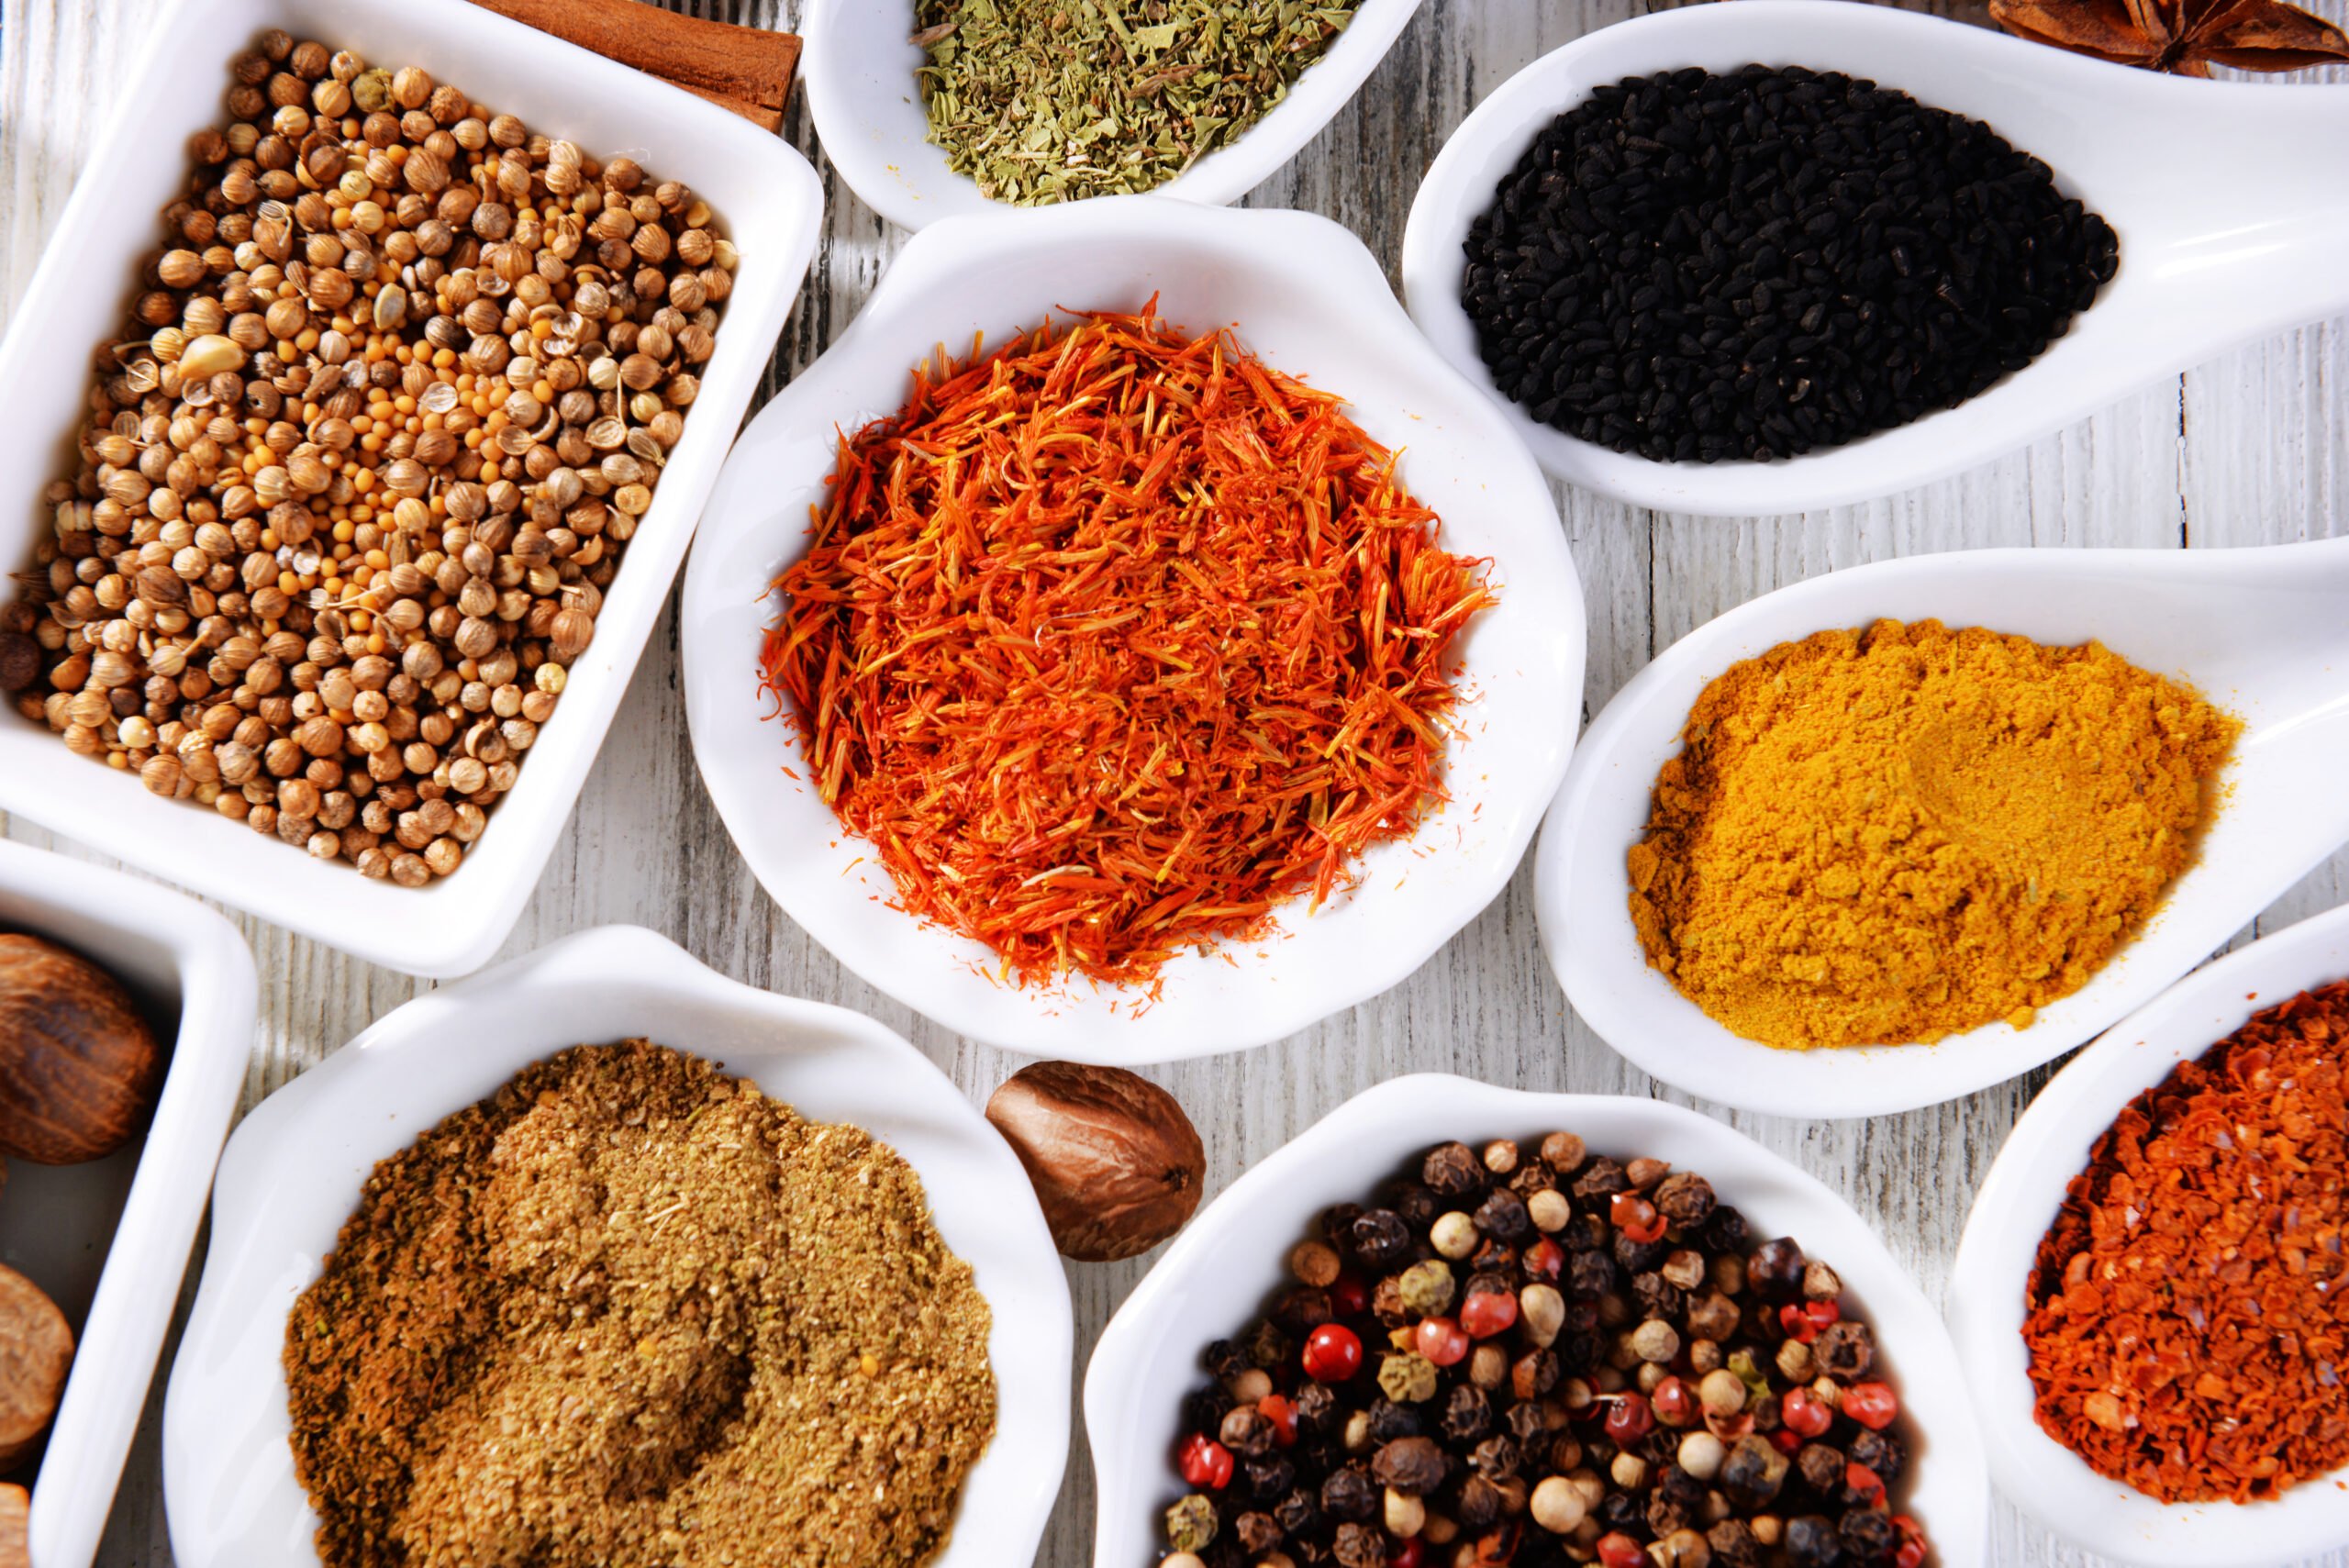 Top 10 Herbs and Spices for Cooking: the best herbs and spices in the typical household for the perfect dishes.